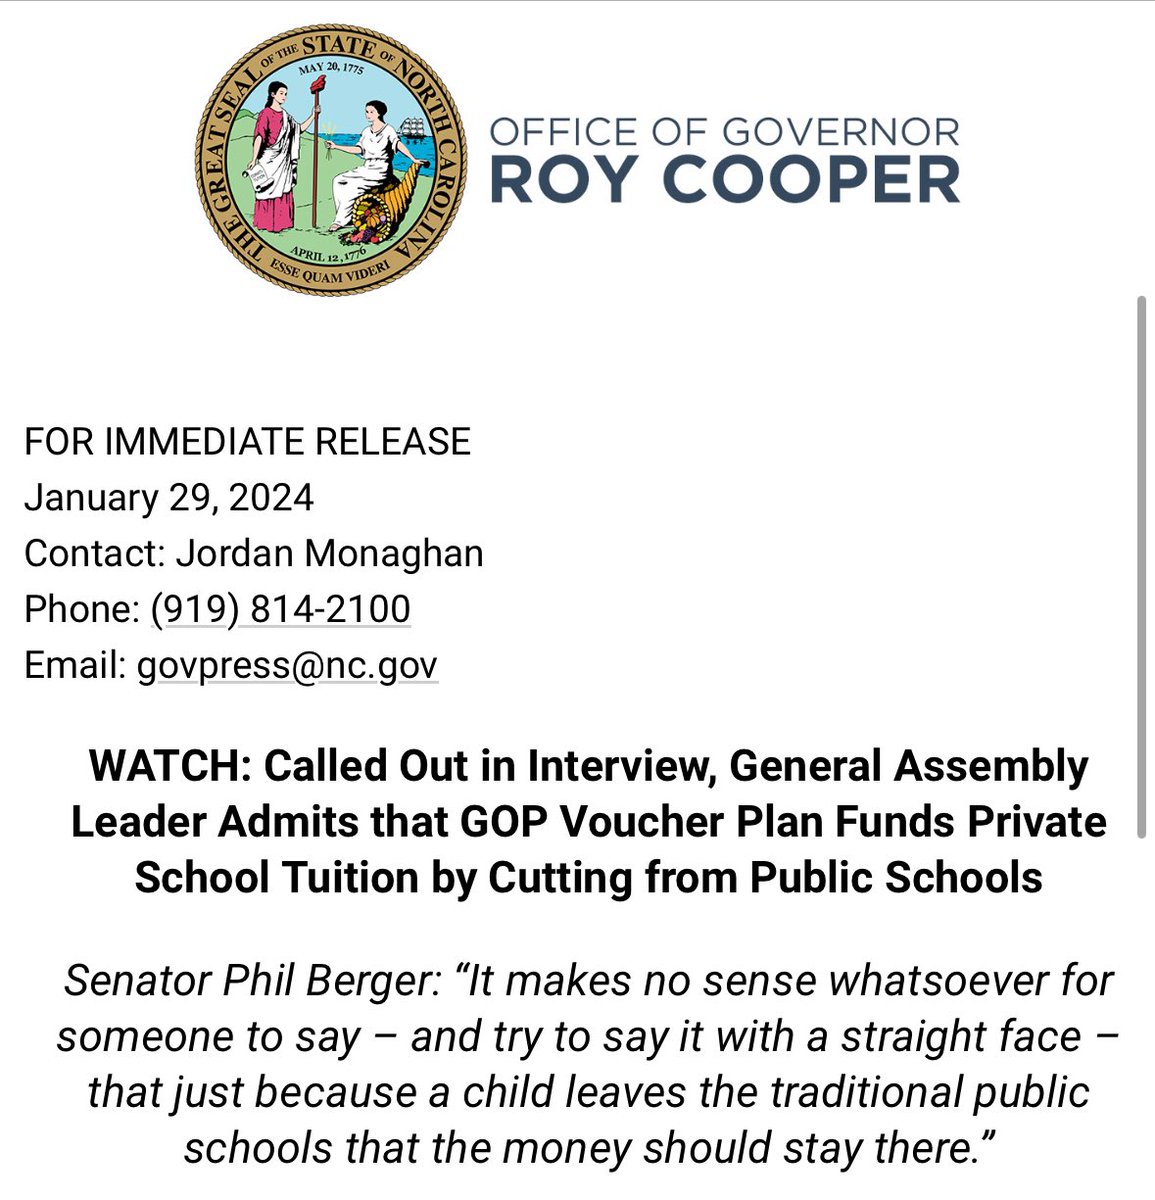 Watch me: When you take your child out of public schools, you don’t get to take your tax dollars with you. If you don’t want to drive the public bus, you don’t get your taxes back for your car.